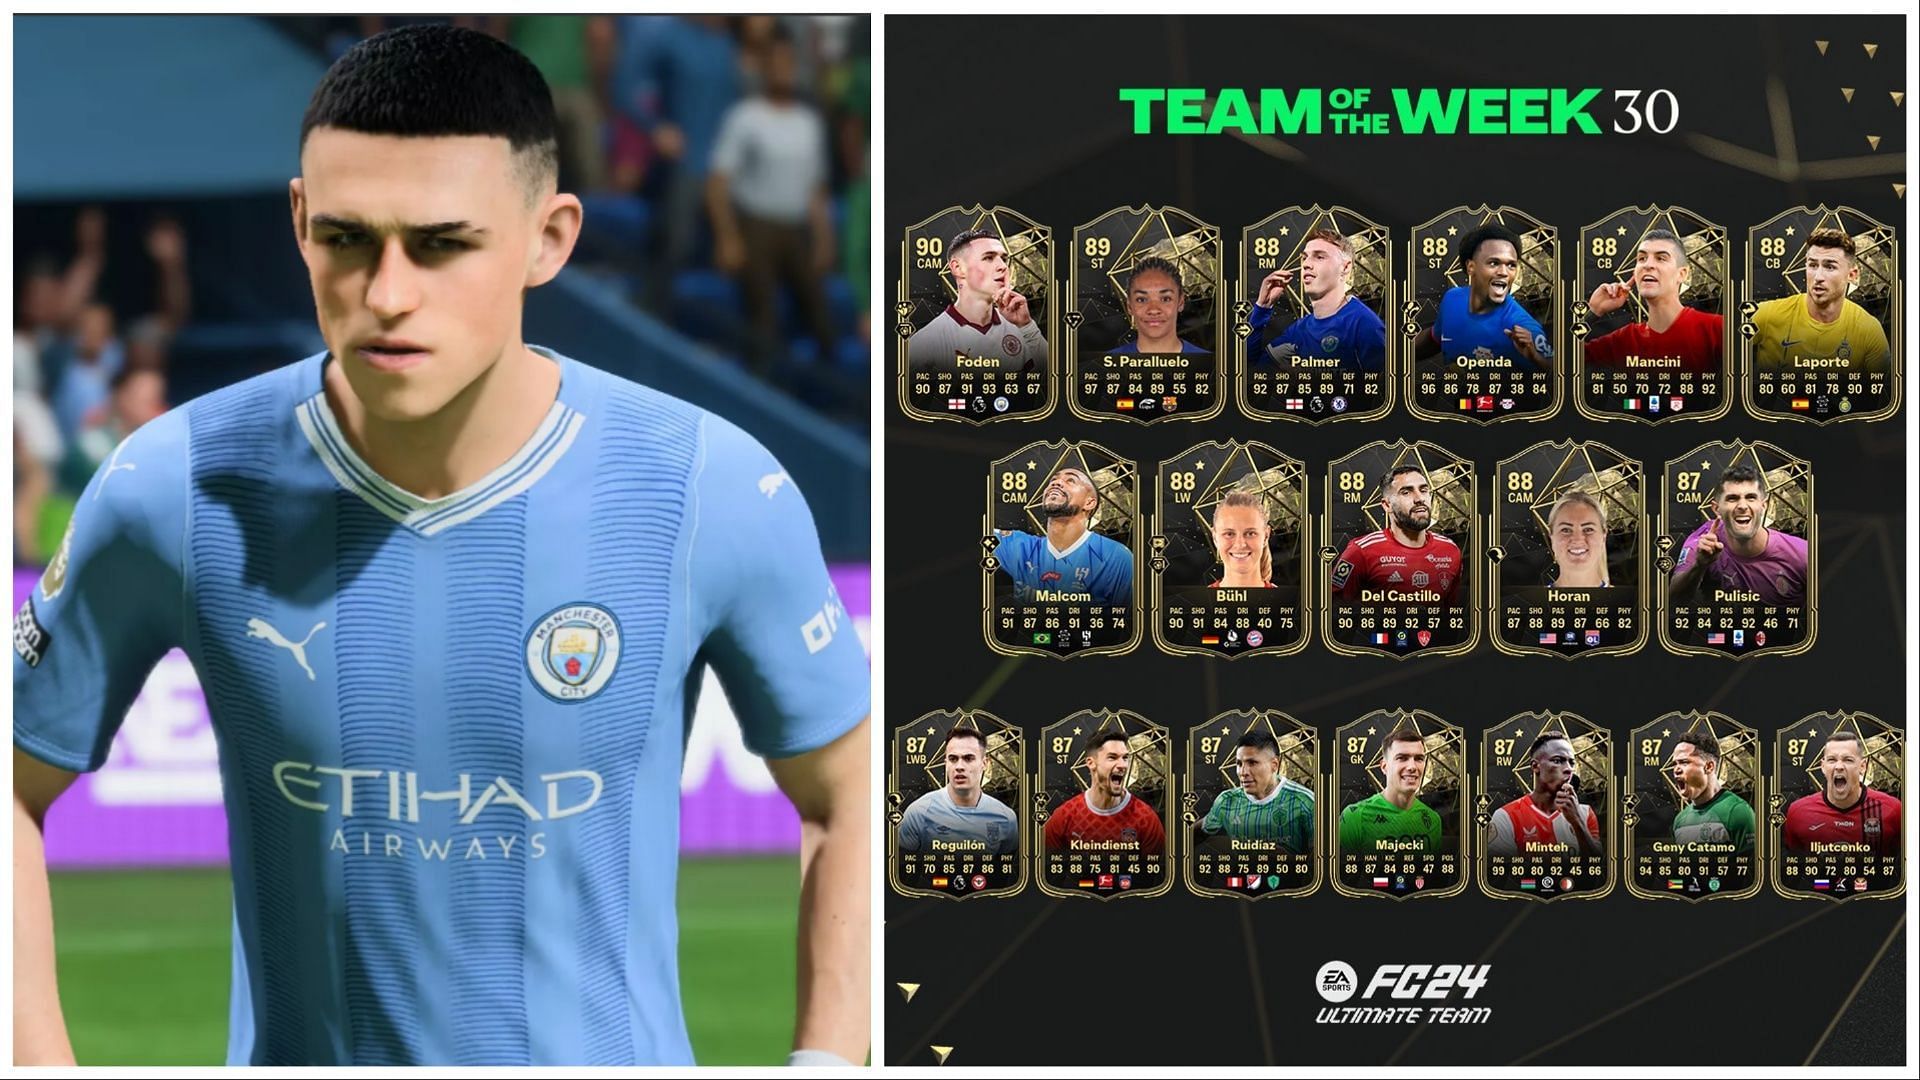 EA FC 24 TOTW 30 is now out